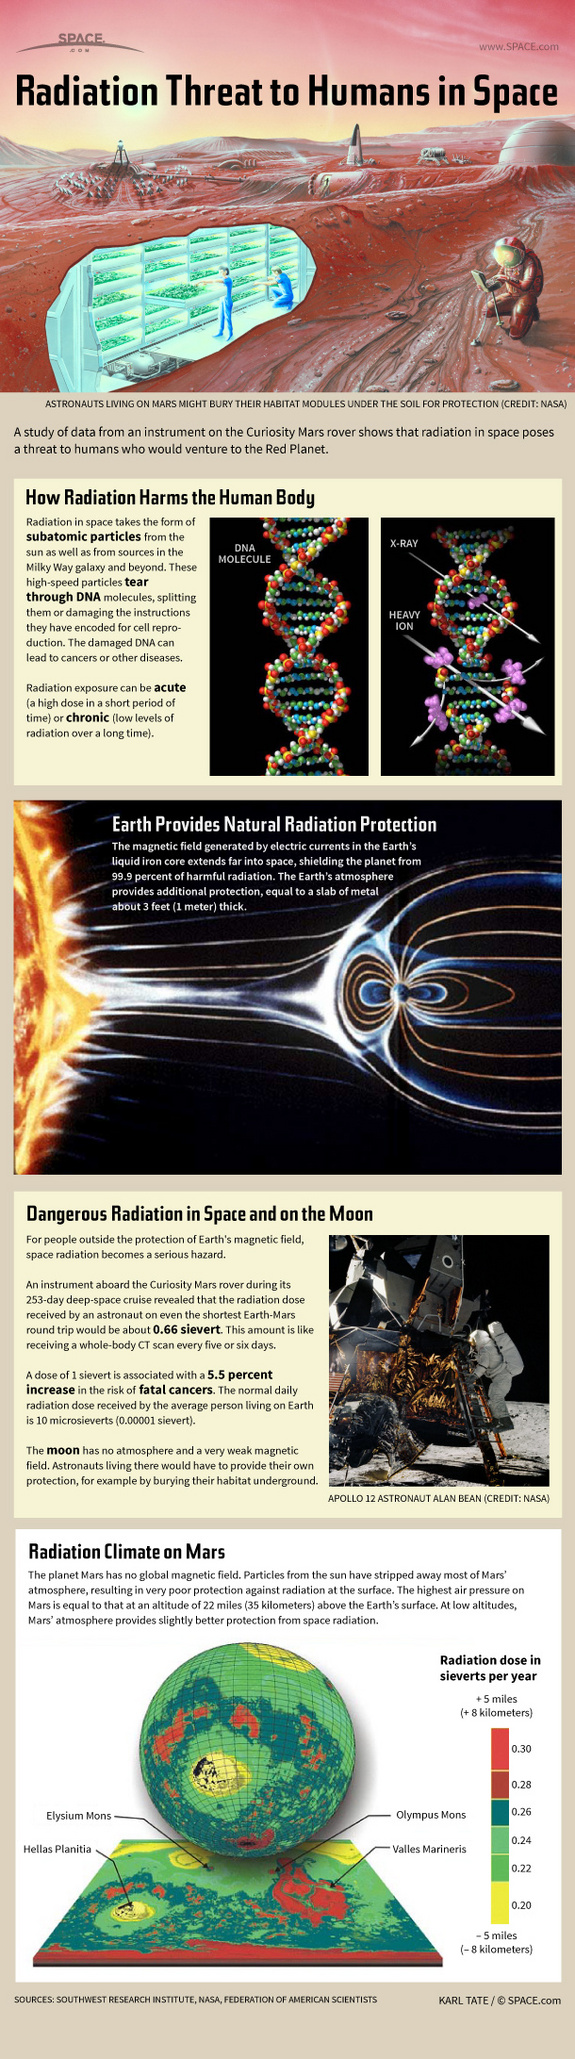 Find out how radiation in space could threaten human explorations in this SPACE.com infographic.